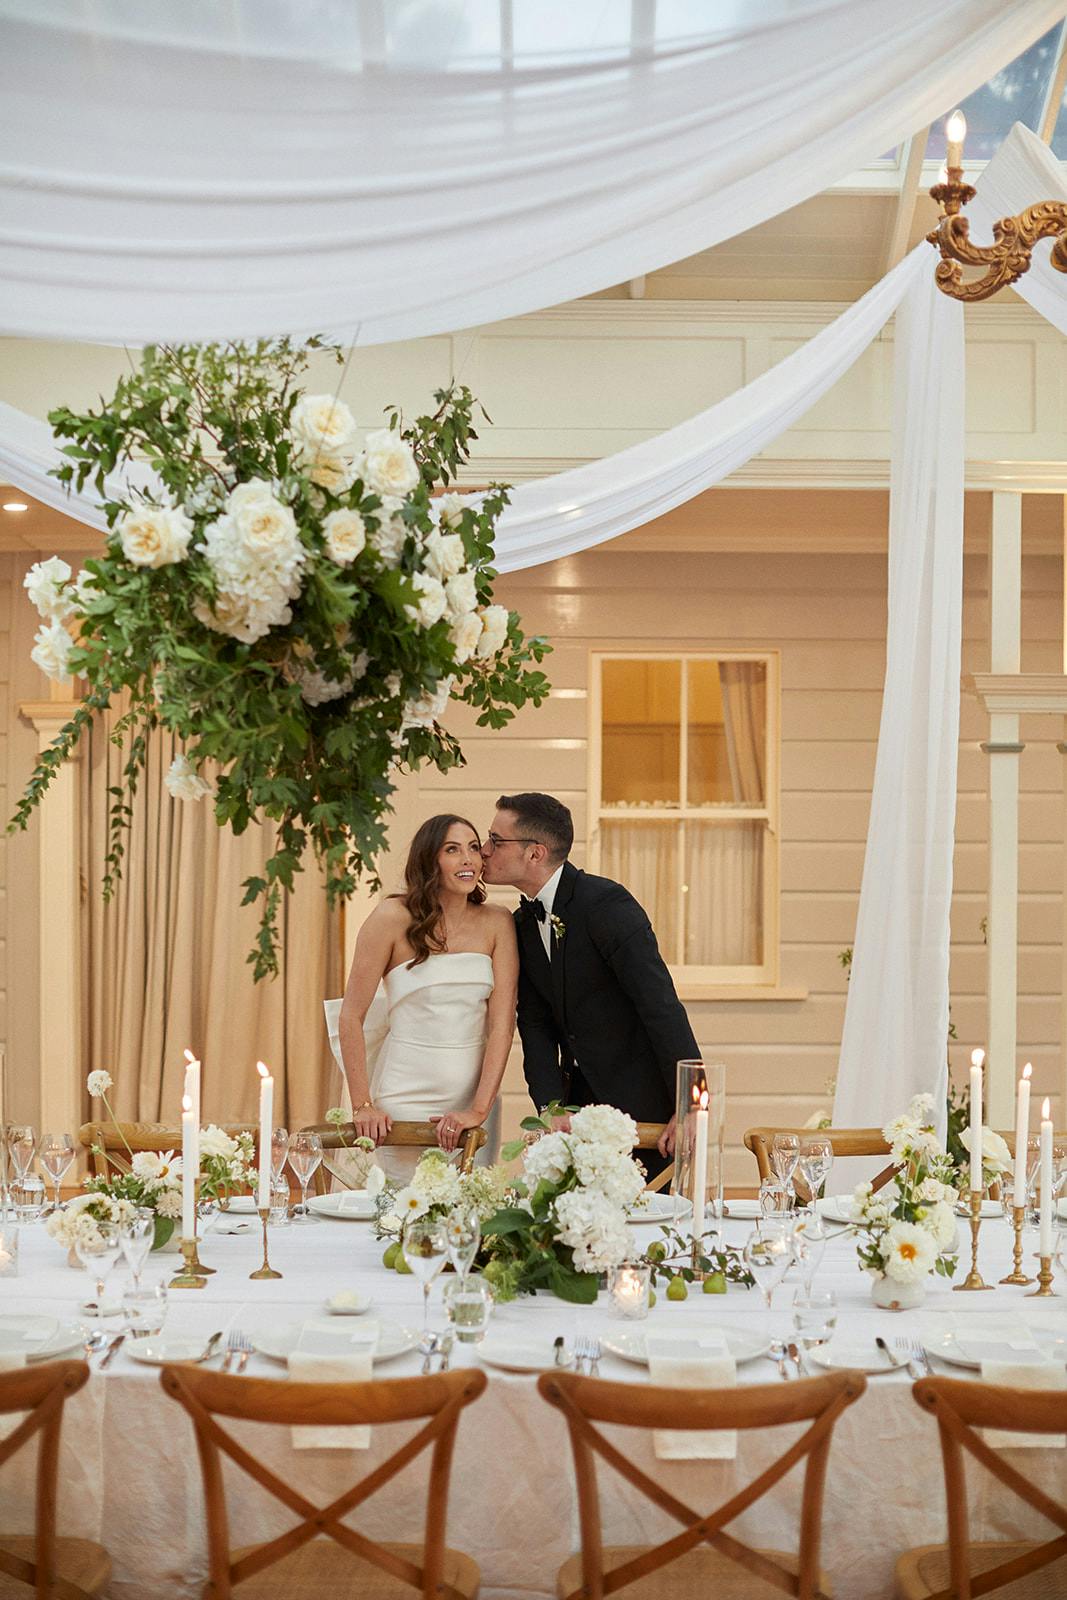 Bride and groom kissing in room with hanging flowers